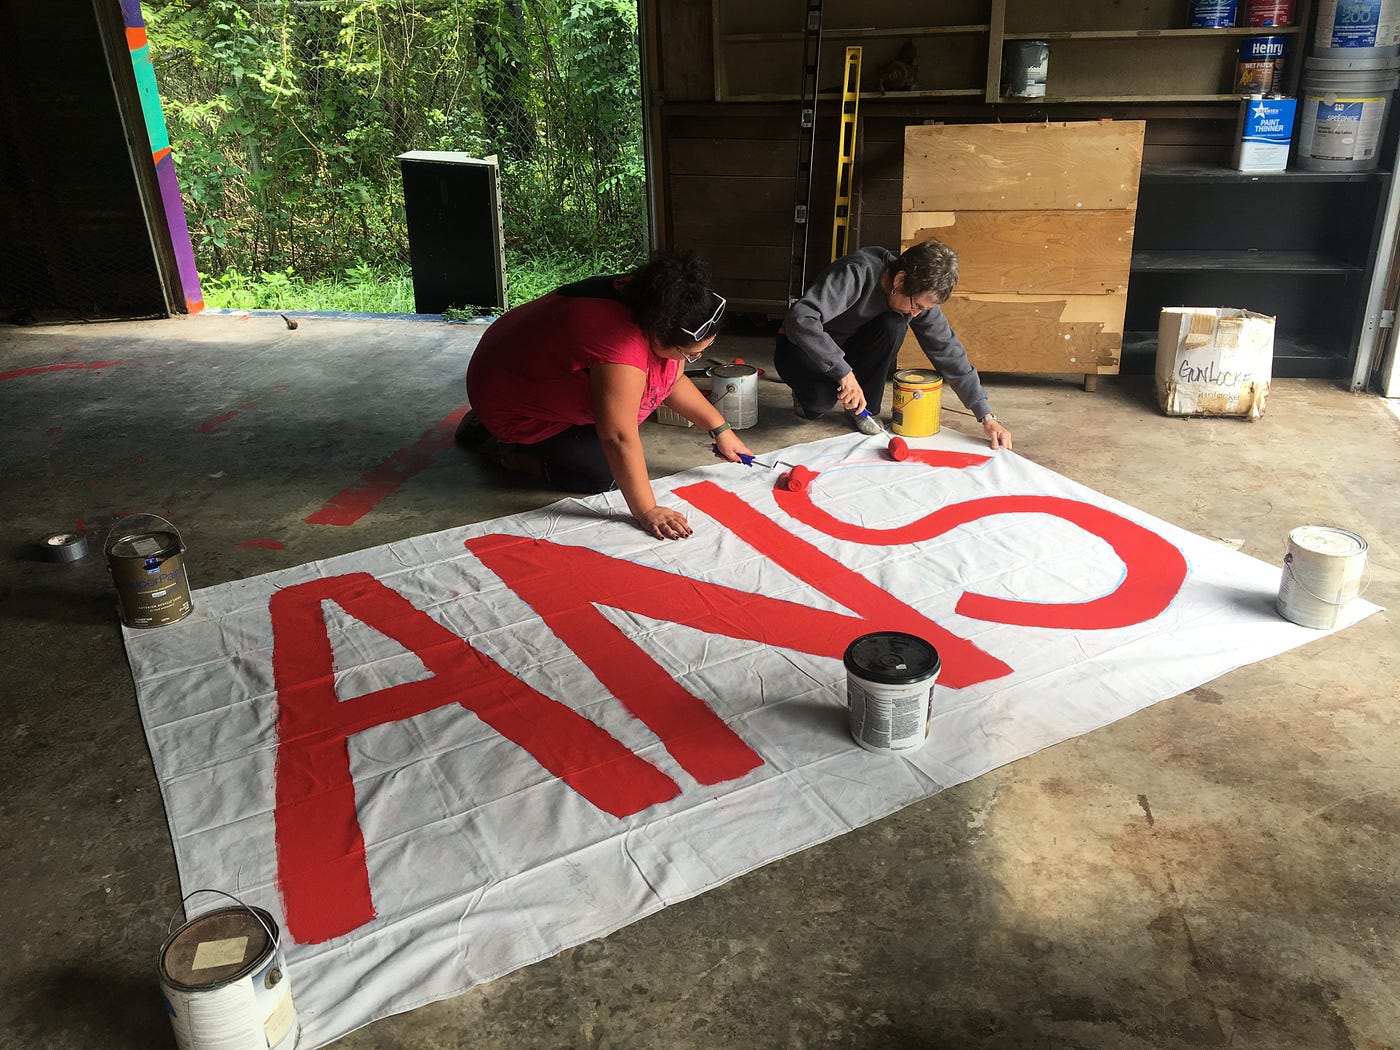 Two volunteers paint a canvas with large red letters on a garage floor.